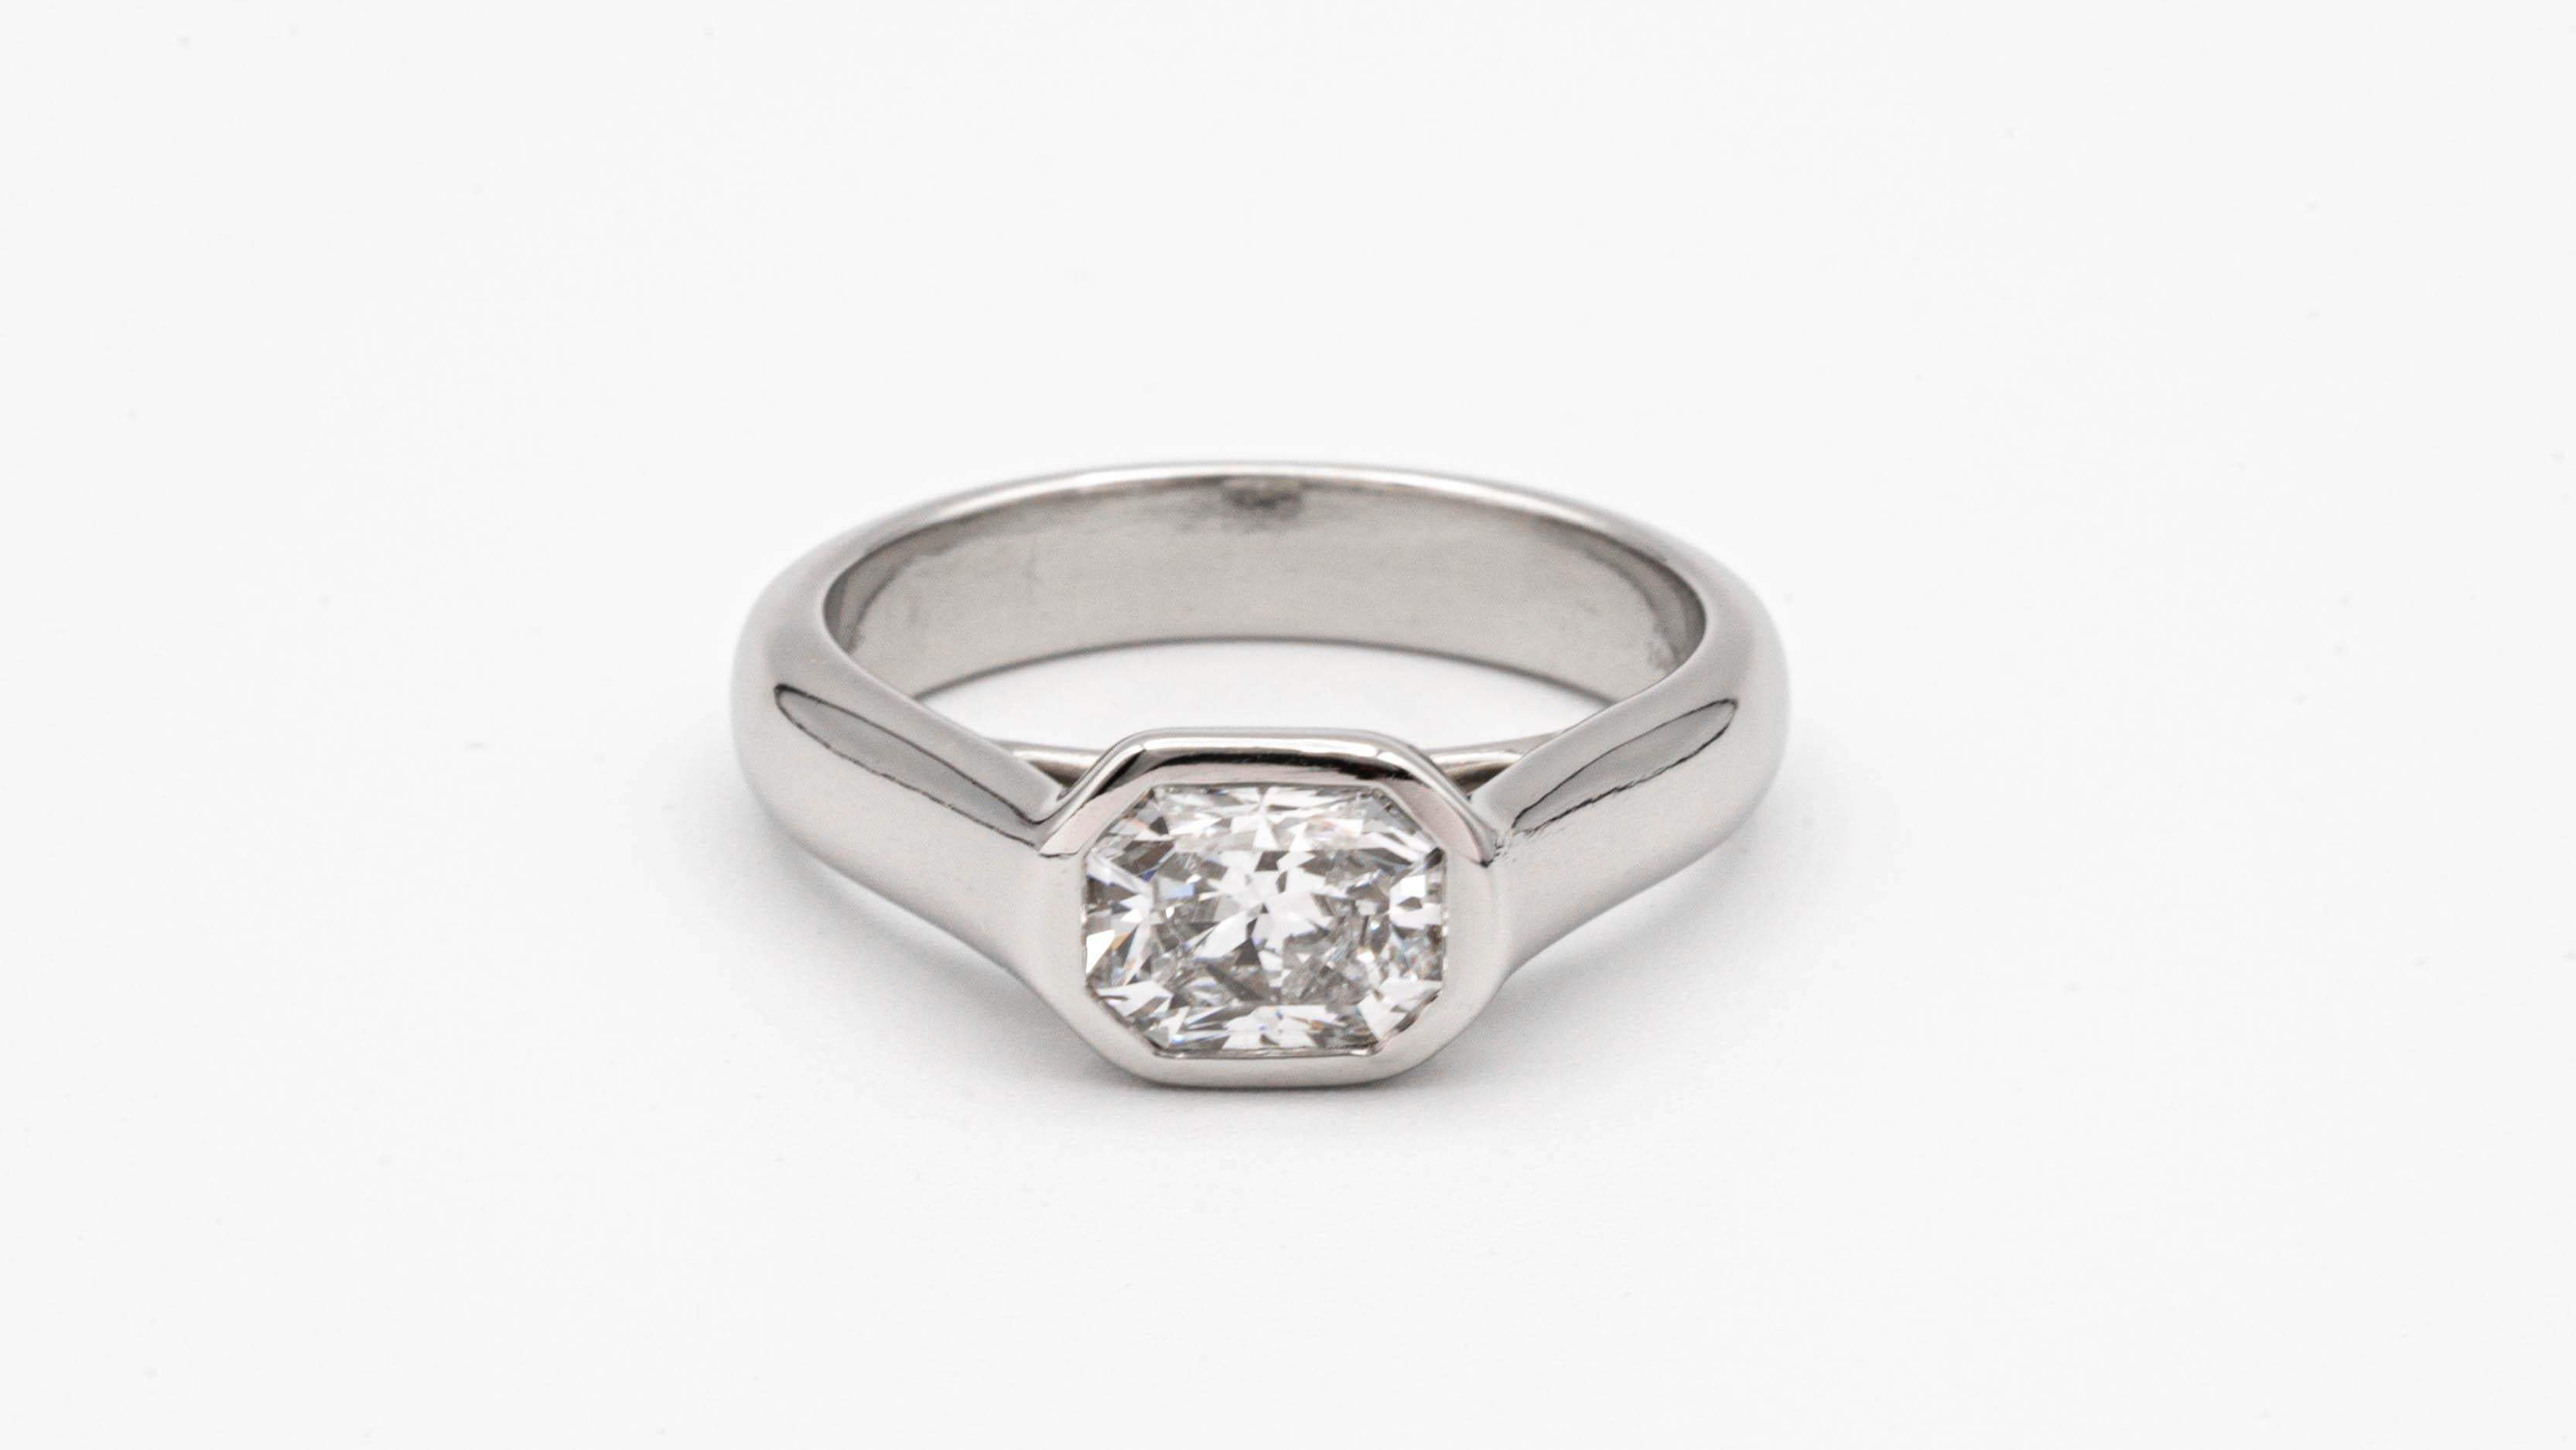 Tiffany & Co. diamond ring finely crafted in platinum with a 1.04 carat, EVVS2 clarity 